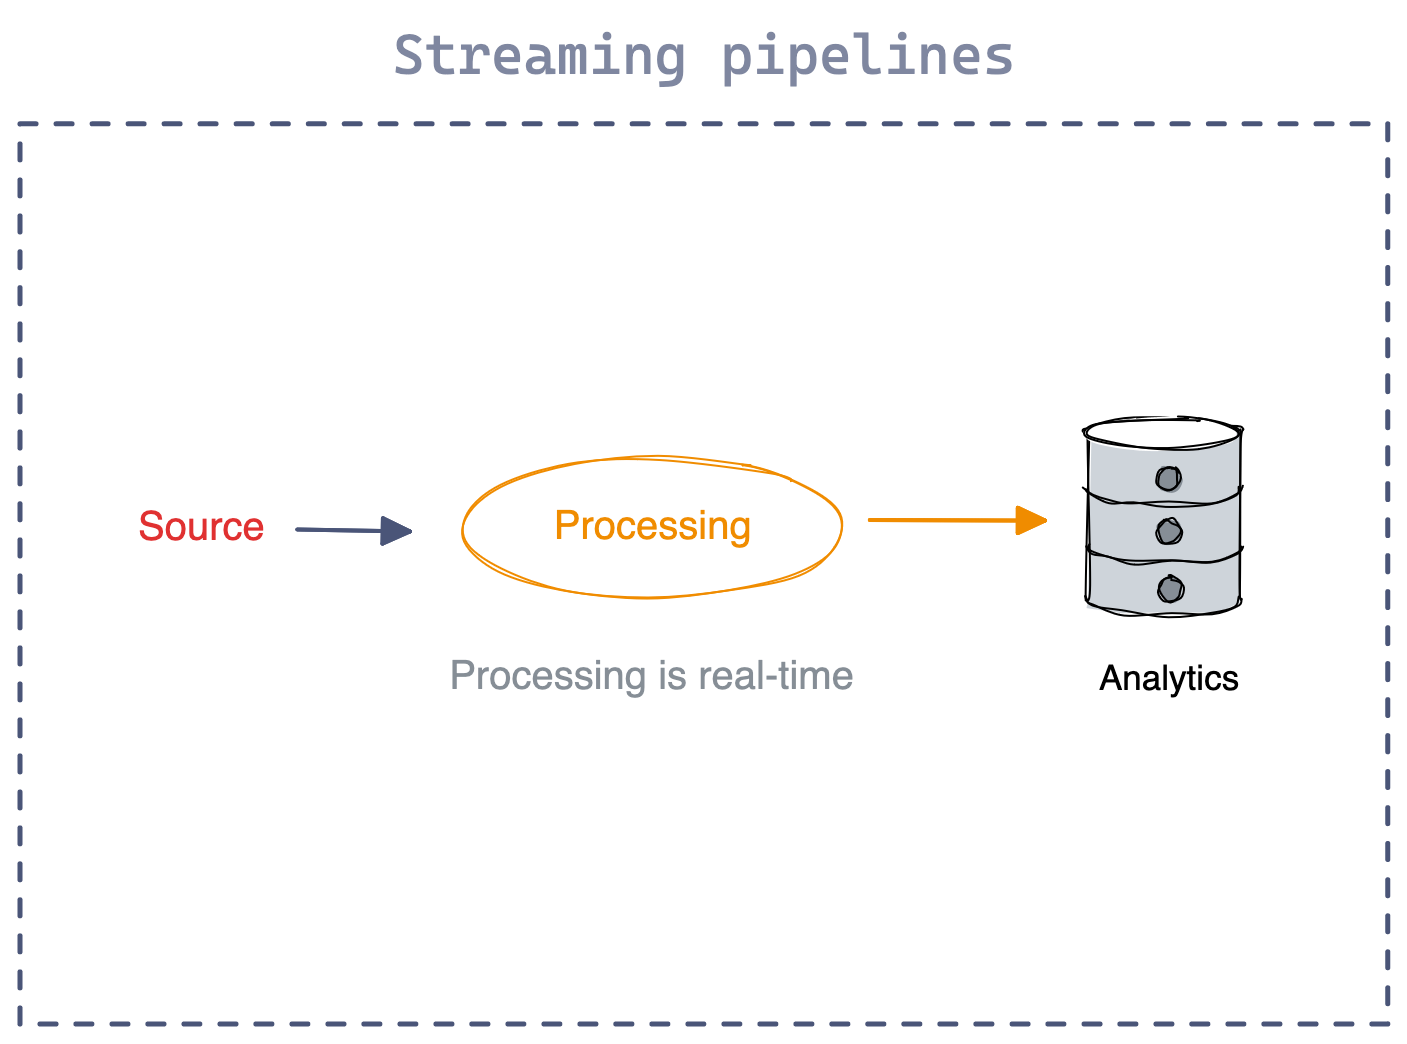 How a streaming pipeline works